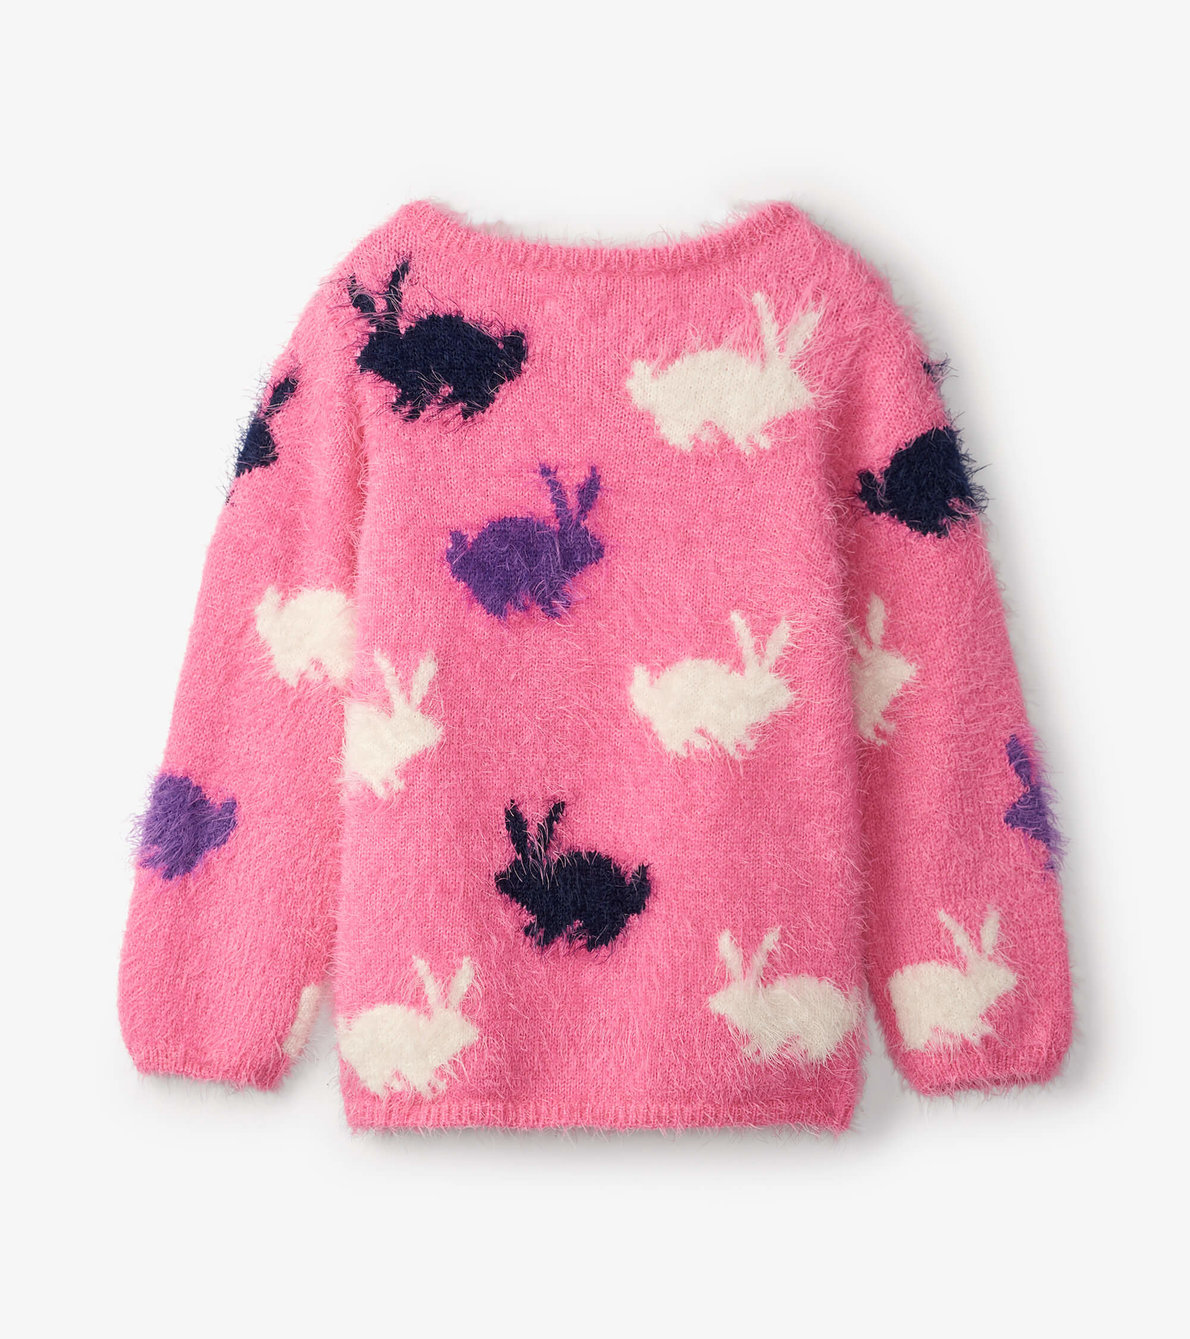 View larger image of Winter Bunnies Fuzzy Sweater